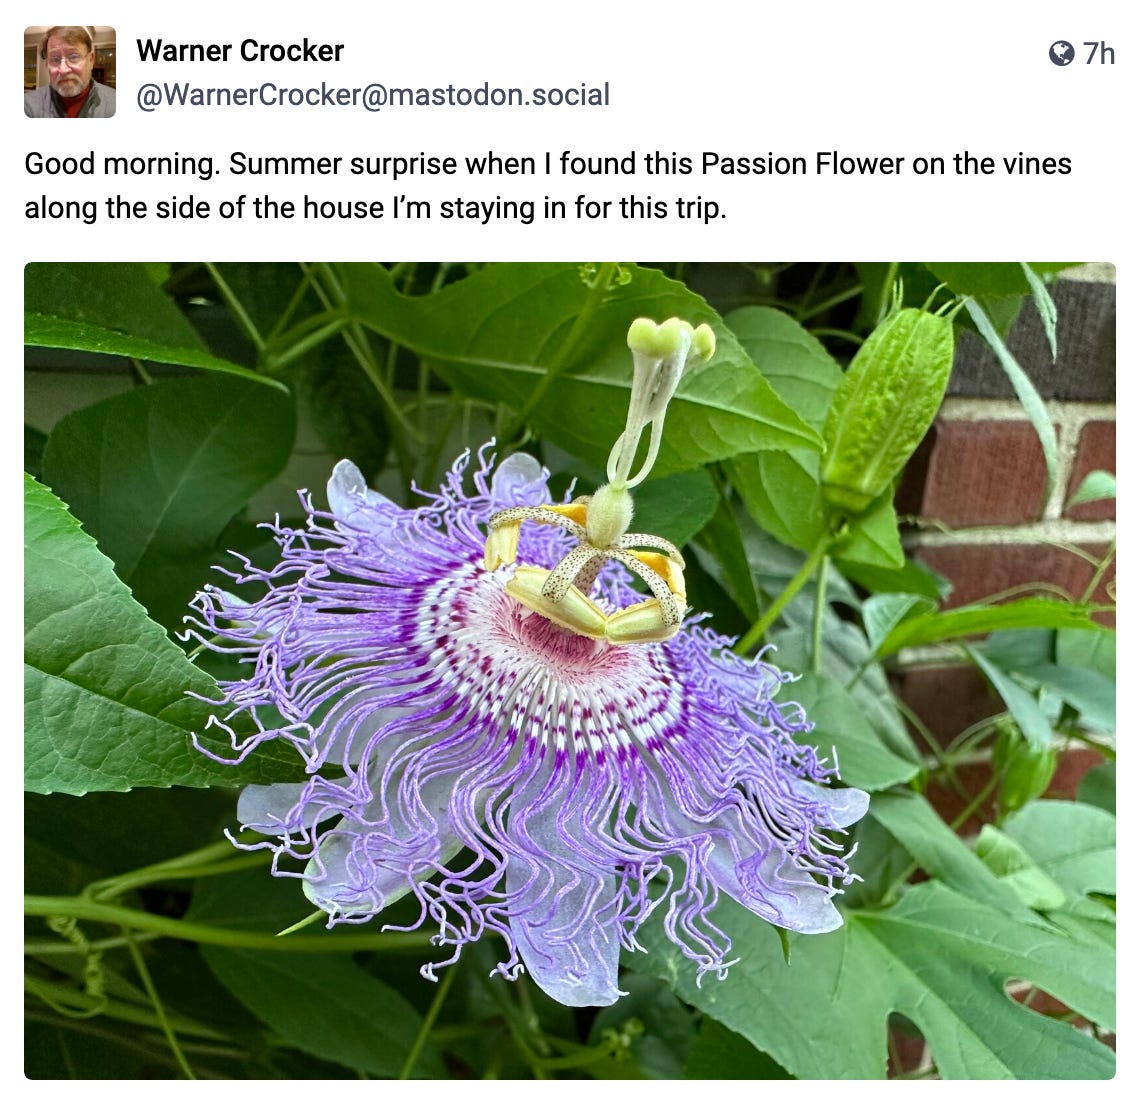 Good morning. Summer surprise when I found this Passion Flower on the vines along the side of the house I’m staying in for this trip. 